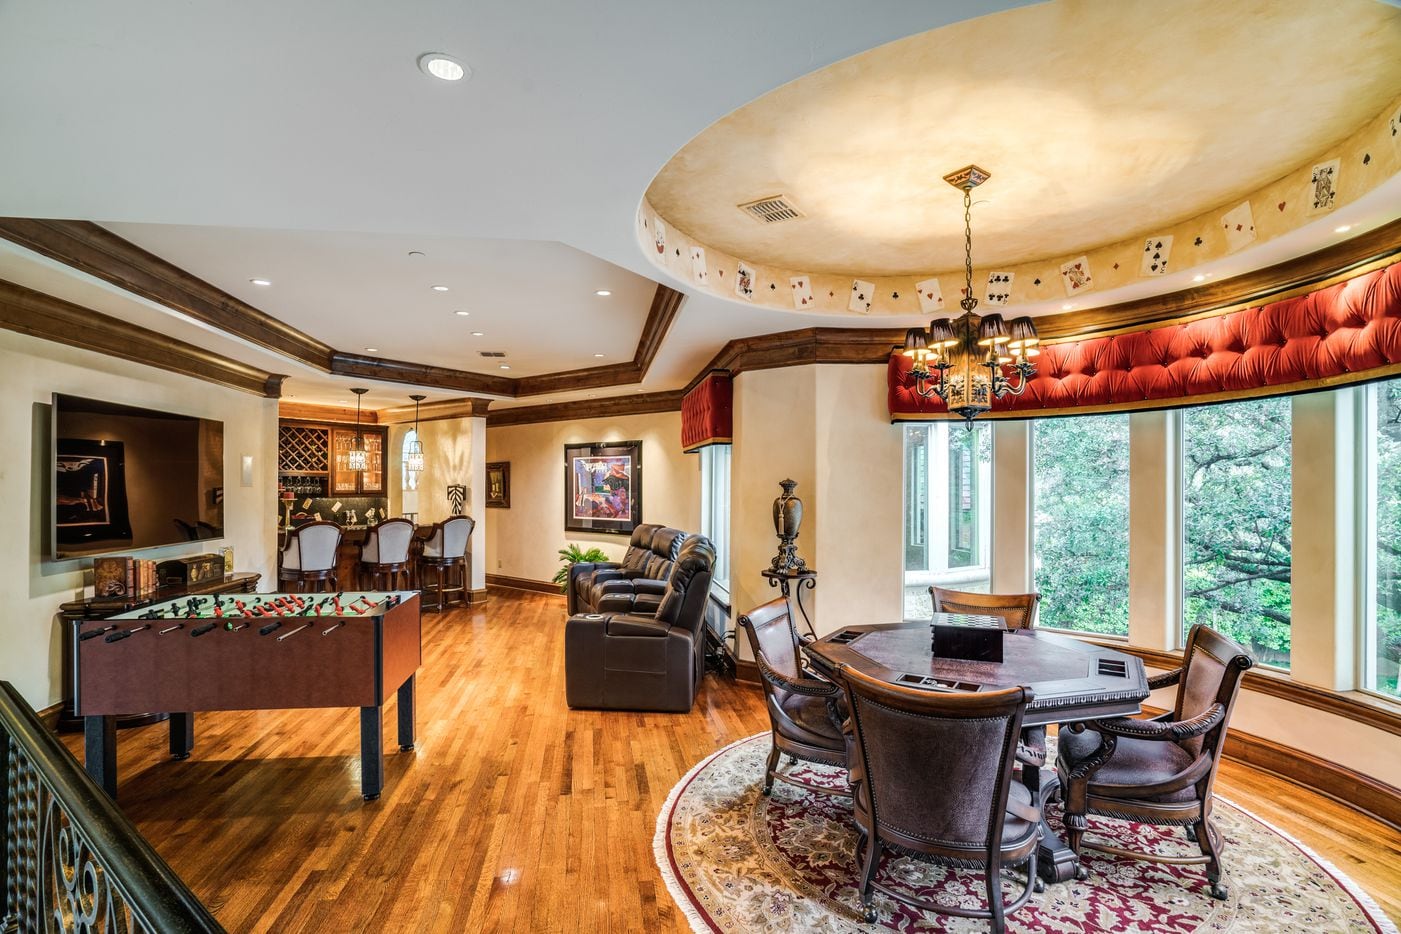 Take a look at the home at 5112 Palomar Lane in Dallas.